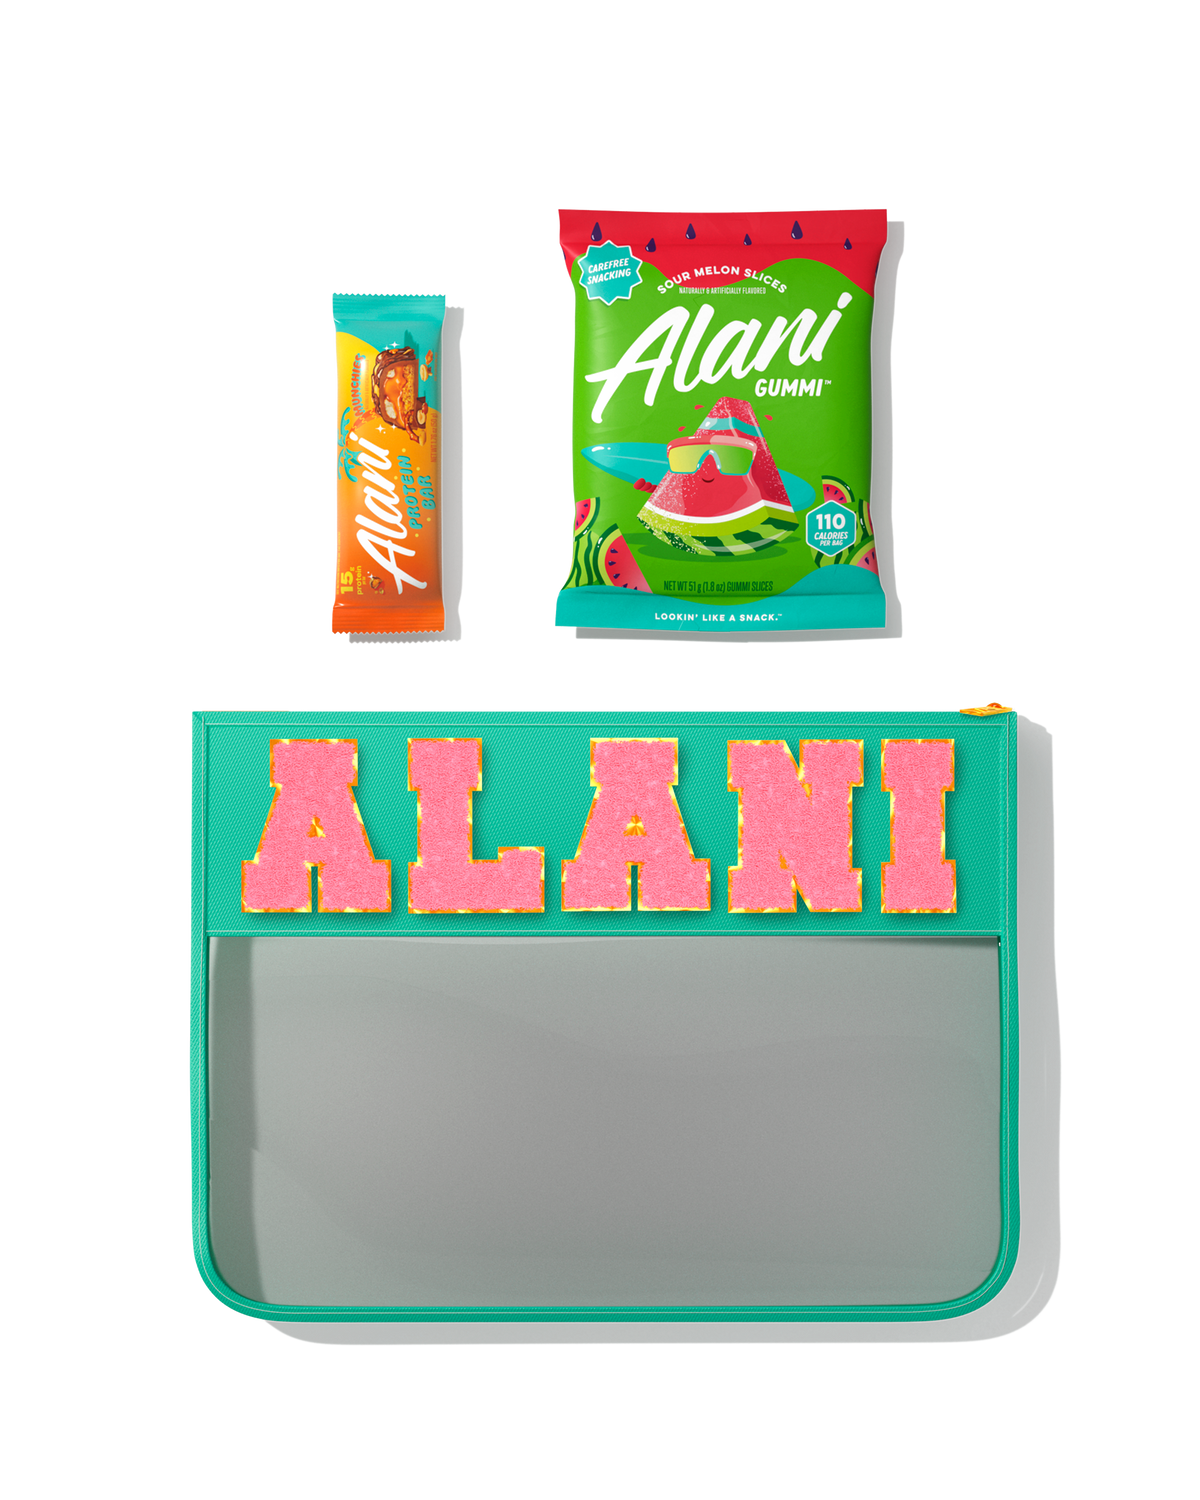 A front view of Alani Nu products, including a pack of Sour Melon Slice Gummies and a Munchies-flavored Protein Bar.